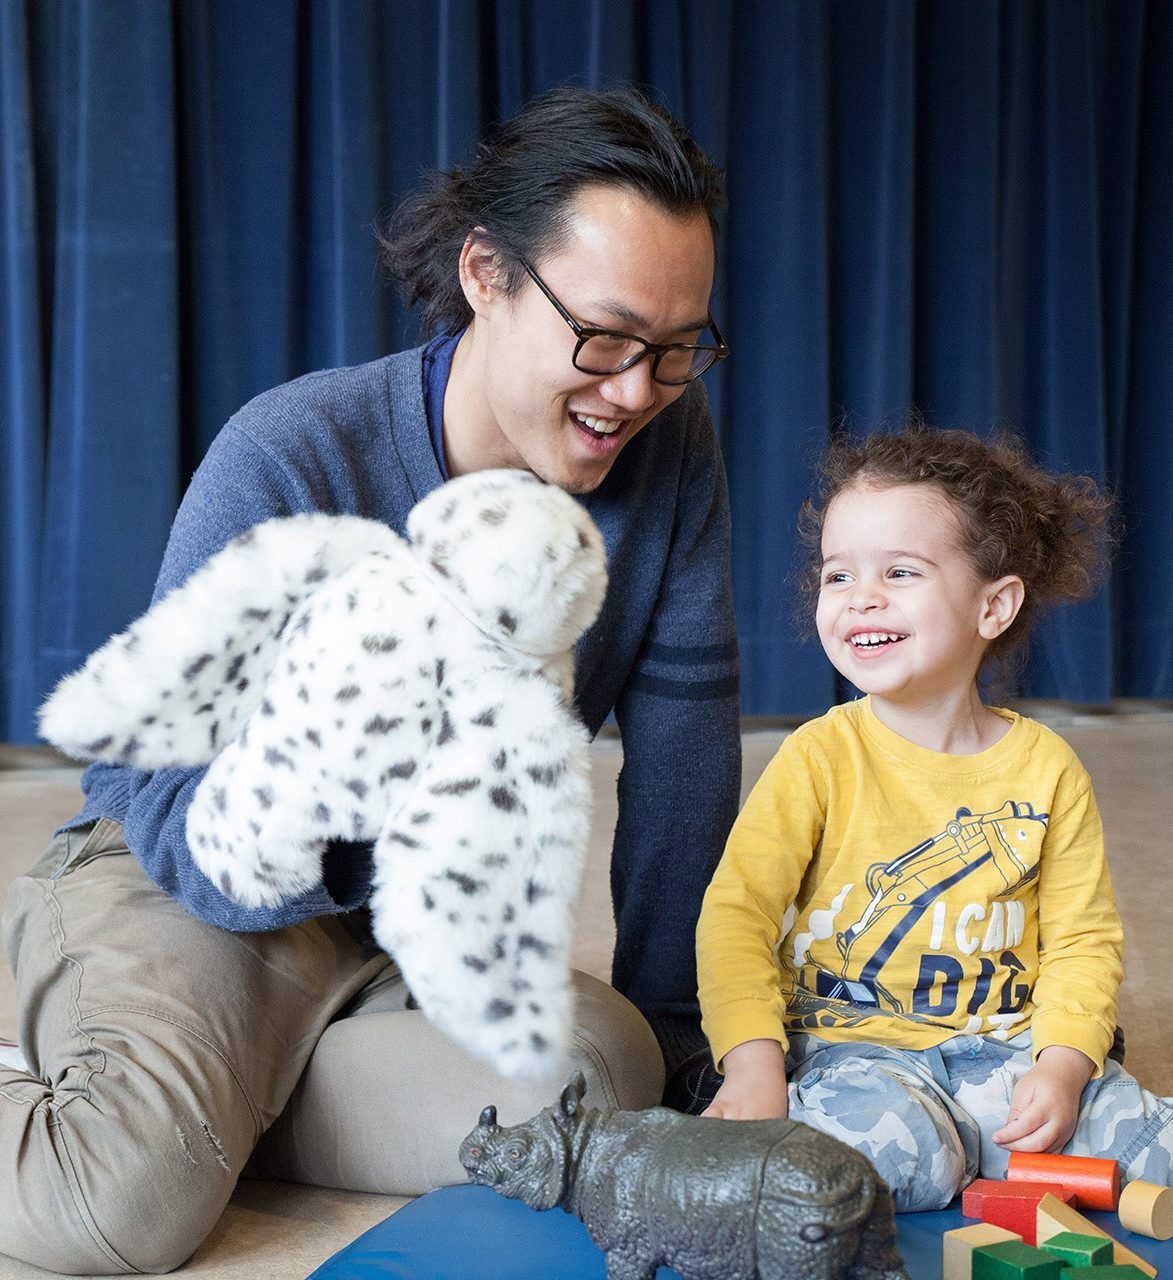 BIPOC male student uses a snowy owl puppet to interact with a young girl.